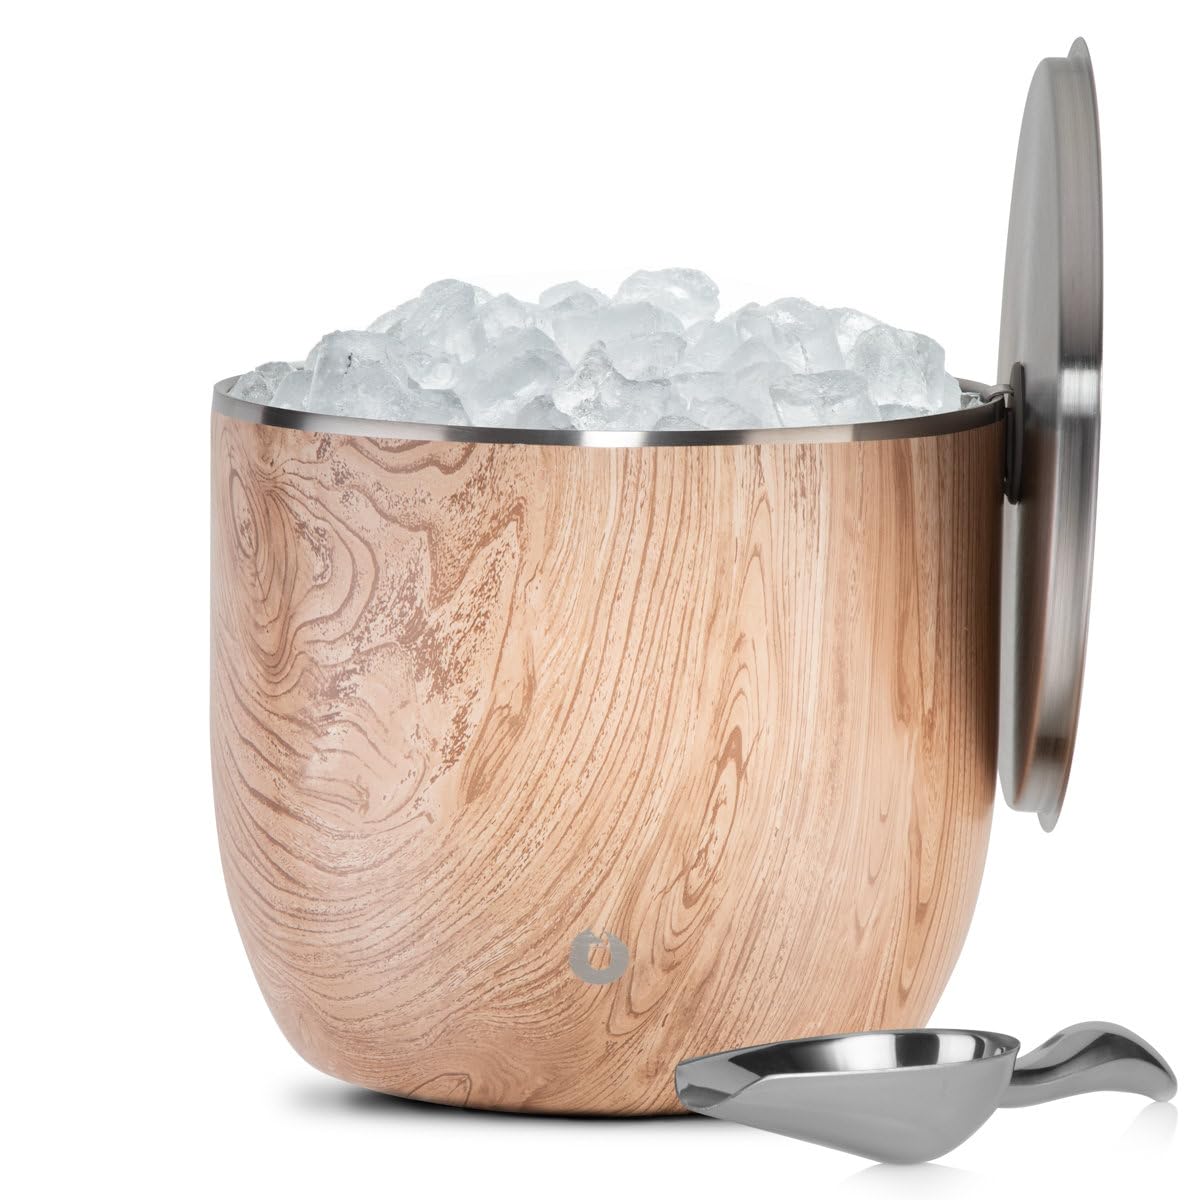 SNOWFOX XL Premium Vacuum Insulated Double Wall Stainless Steel Ice Bucket with Lid/Scoop-Bar Accessories-Large Elegant Party Bucket-Chill Several Bottles-Beautiful Entertaining-7L-Natural Teak